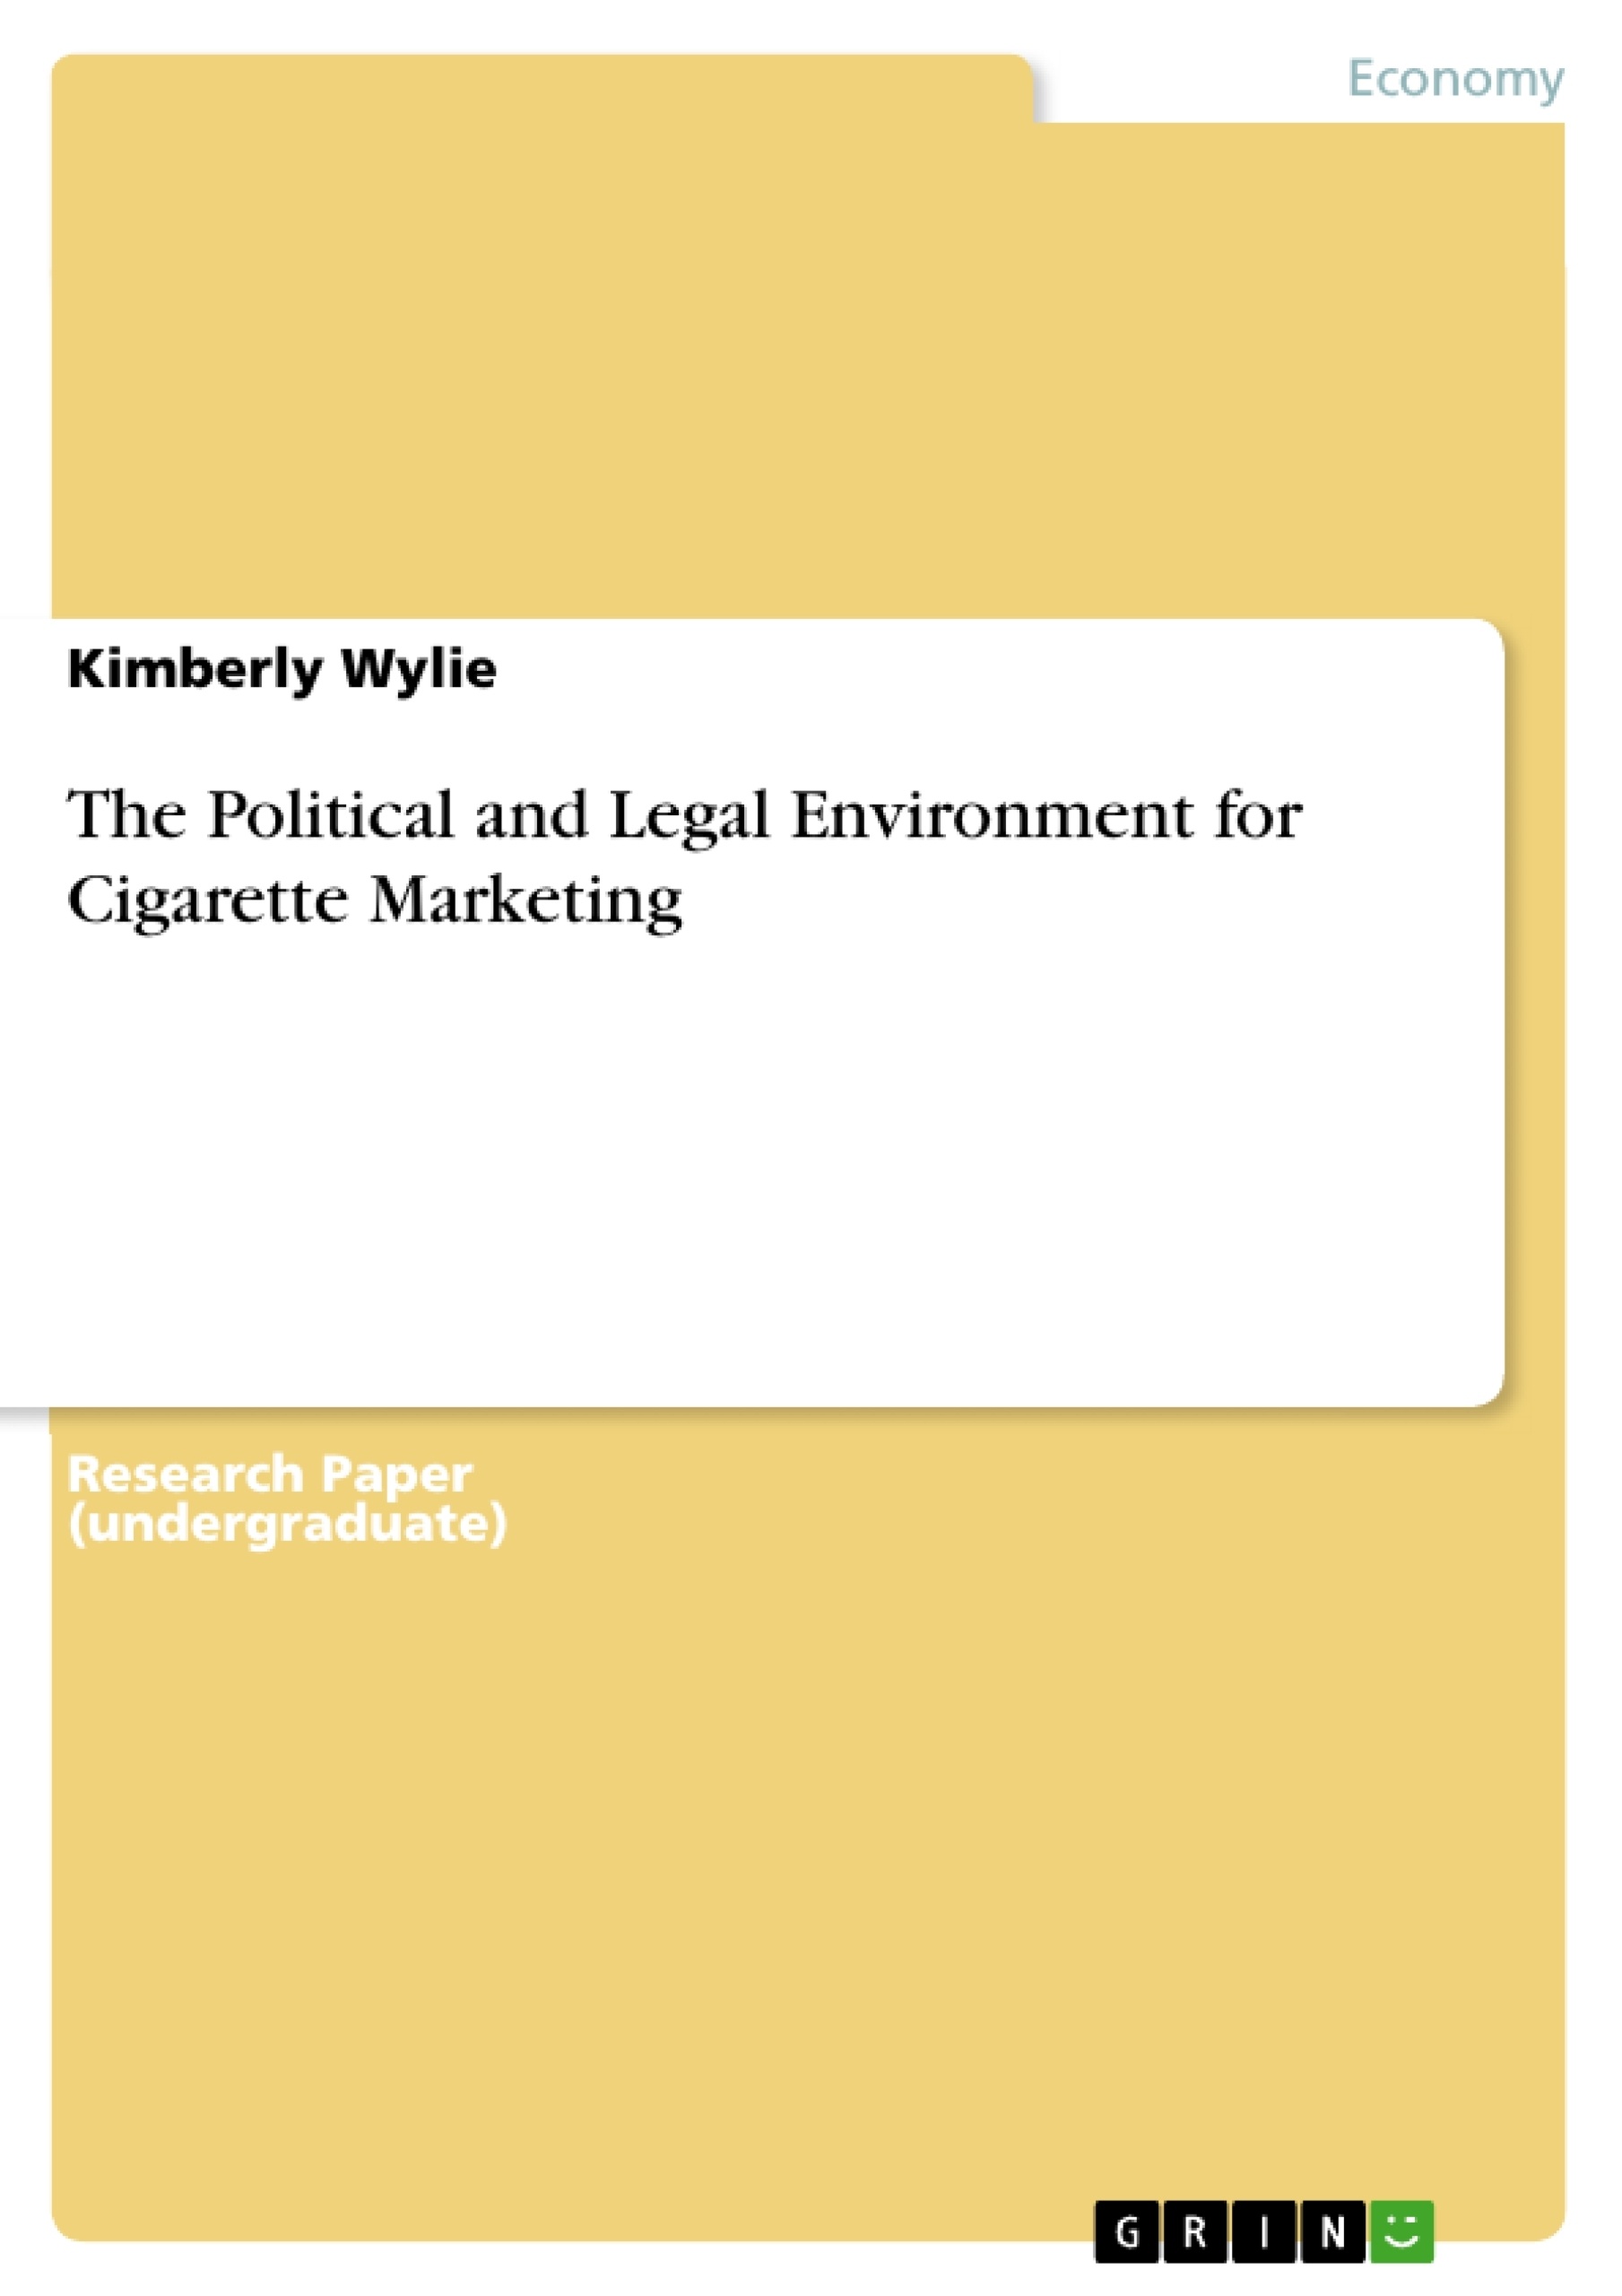 Titel: The Political and Legal Environment for Cigarette Marketing